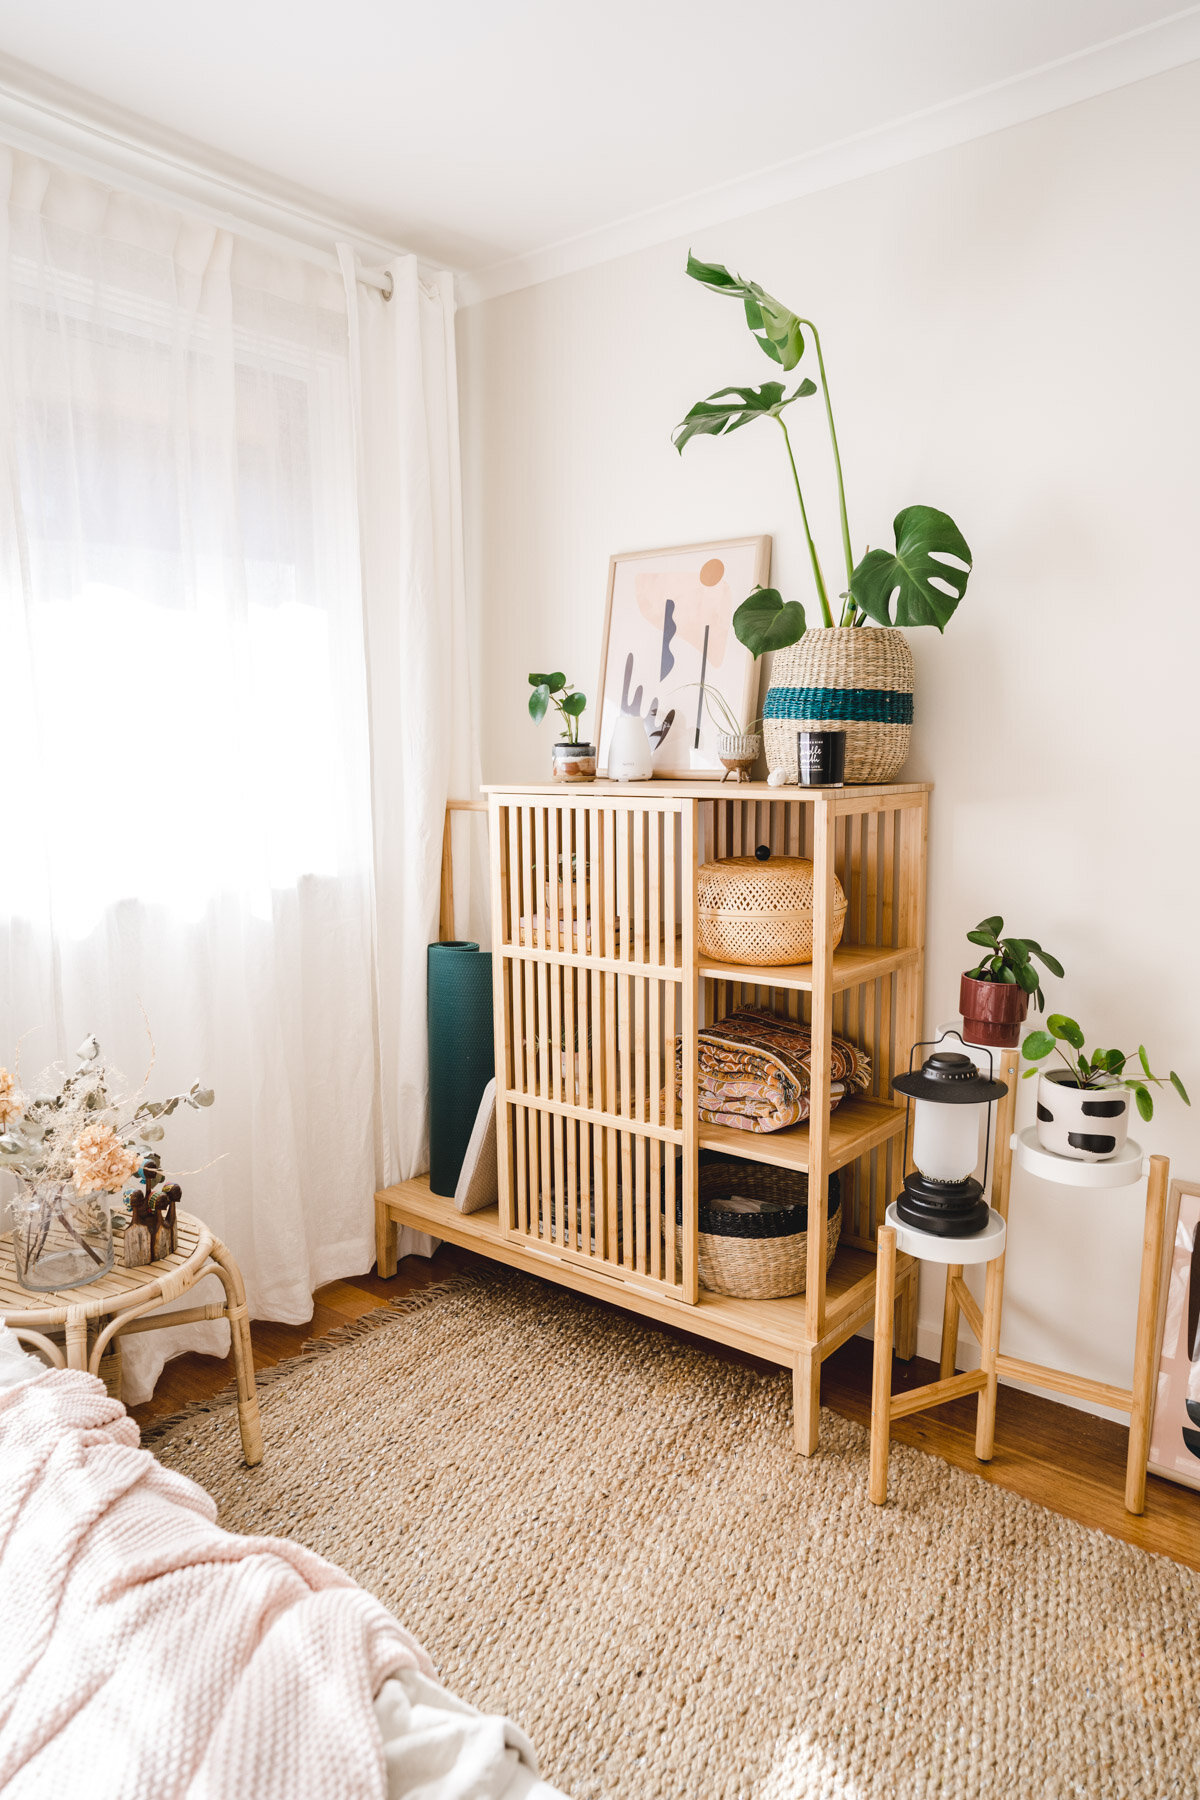 Bringing Wellness Home with IKEA — CONNIE AND LUNA